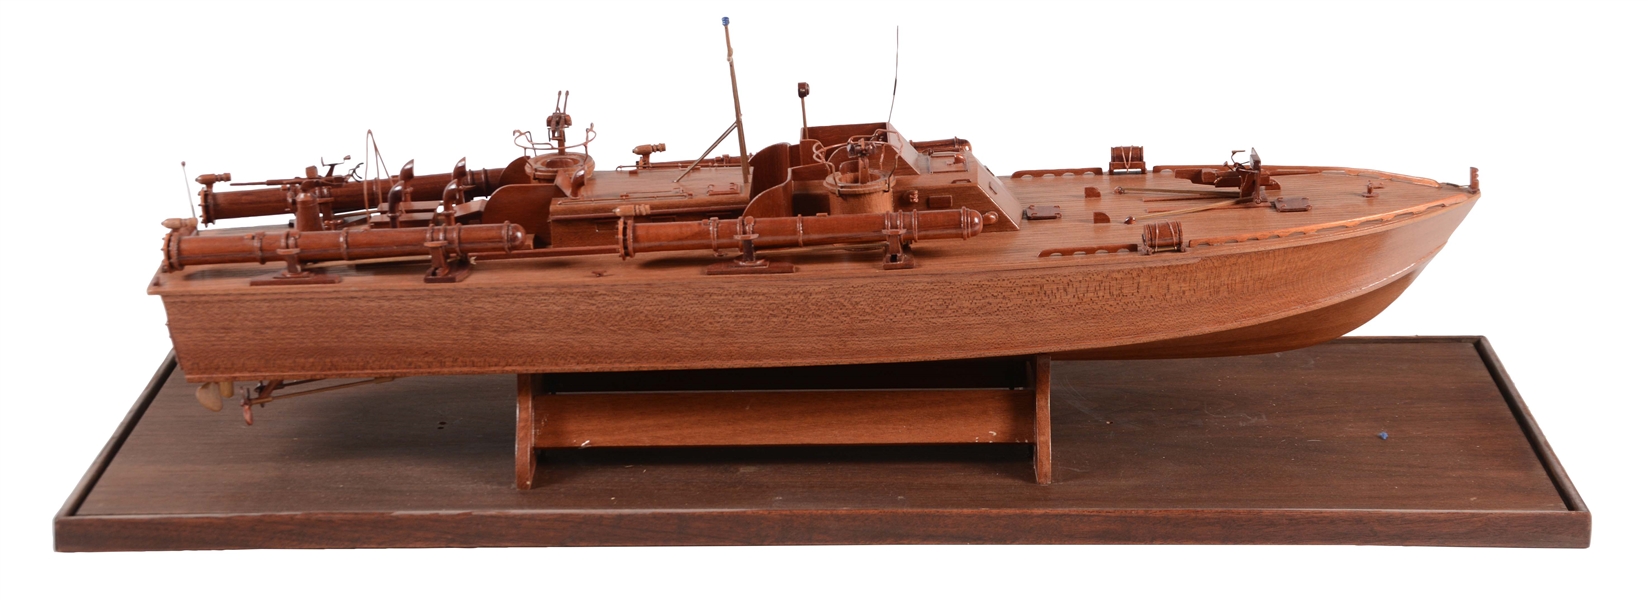 CONTEMPORARY WOODEN PT BOAT MODEL IN DISPLAY CASE.